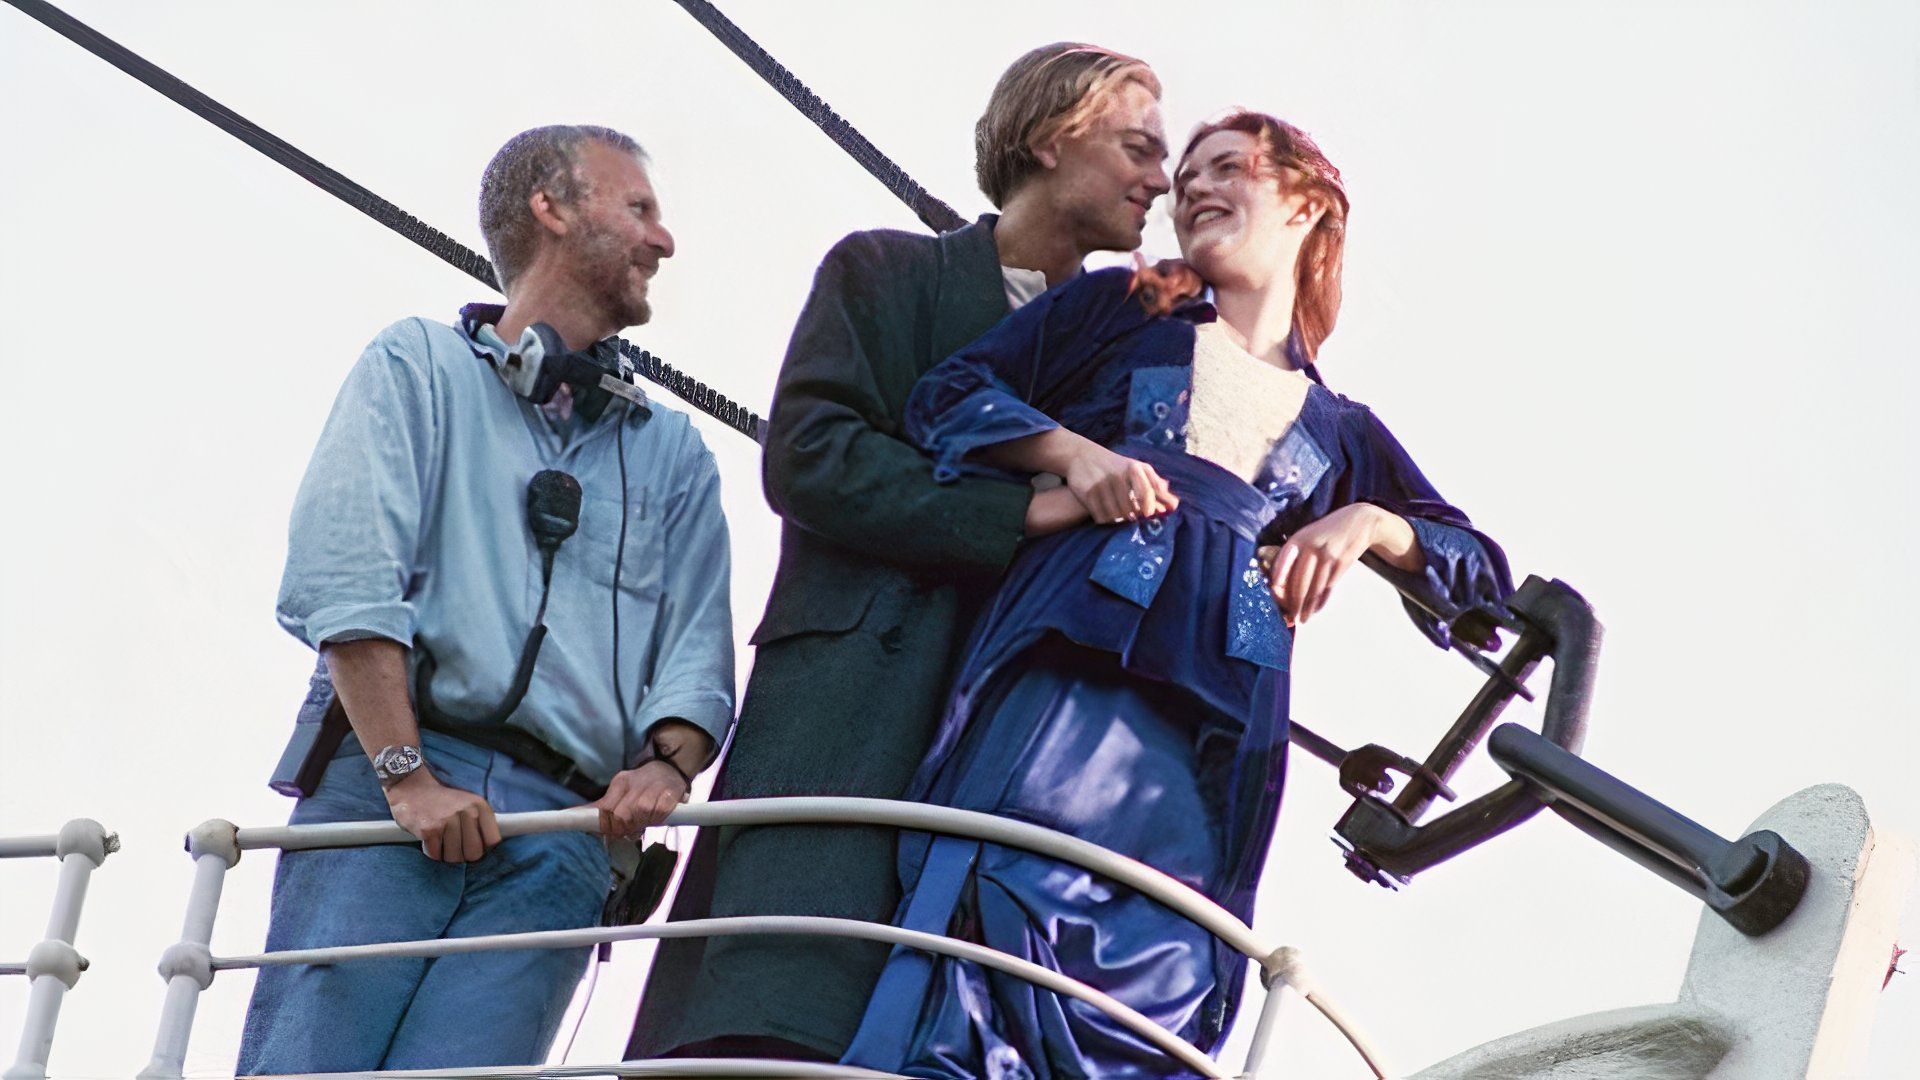 James Cameron Leonardo DiCaprio and Kate Winslet having a laugh between takes on the set of Titanic